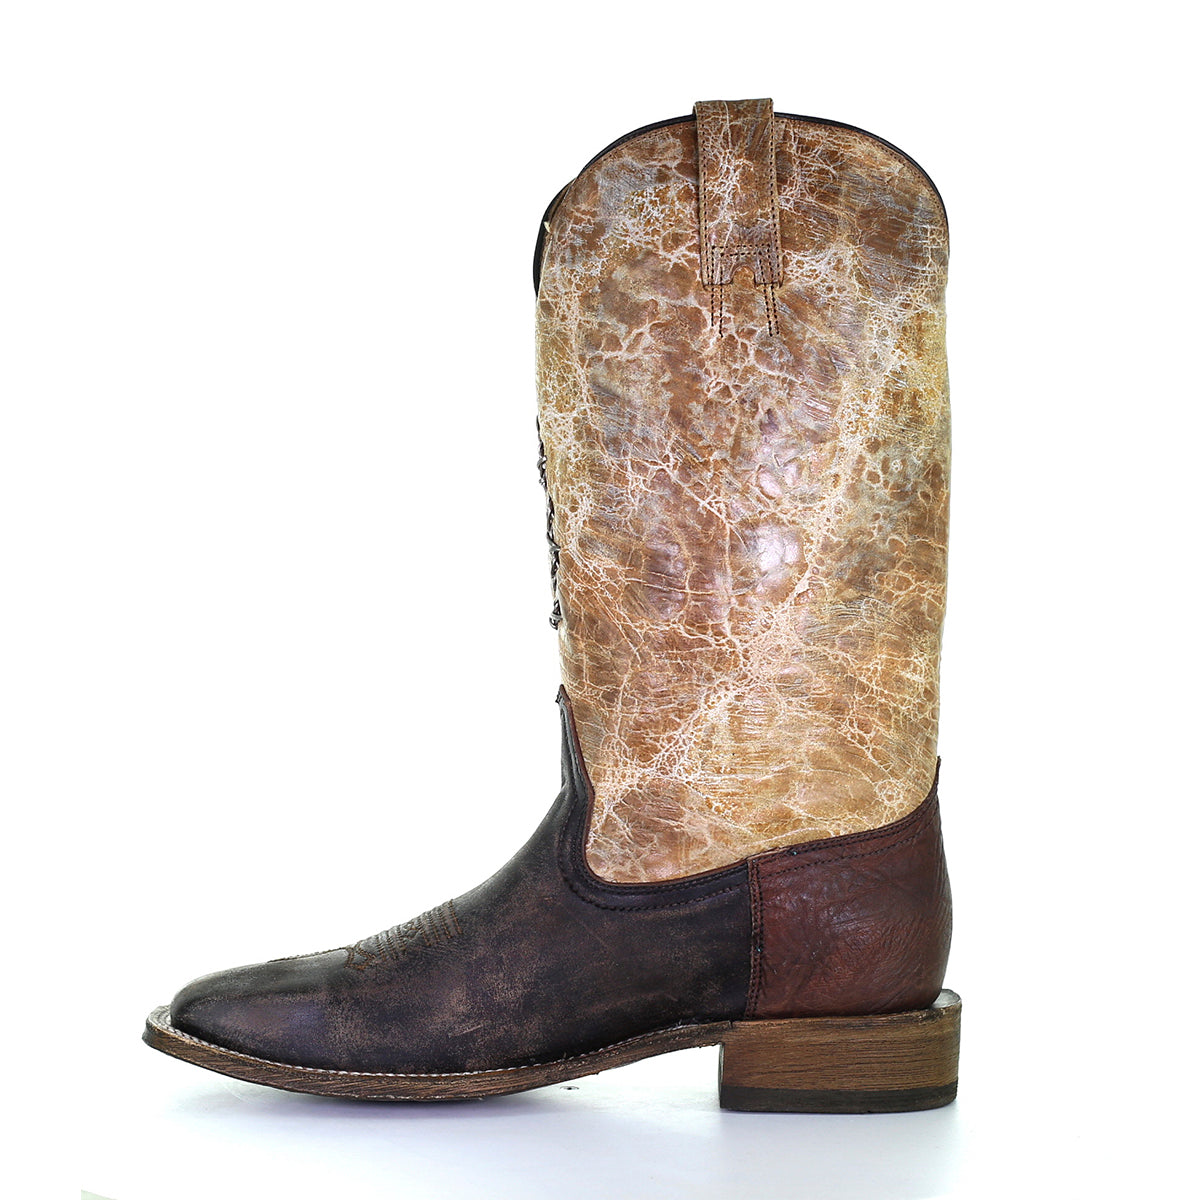 Corral Men's | Texas Inlay & Wired Wide Square Toe | Brown - Outback Traders Australia